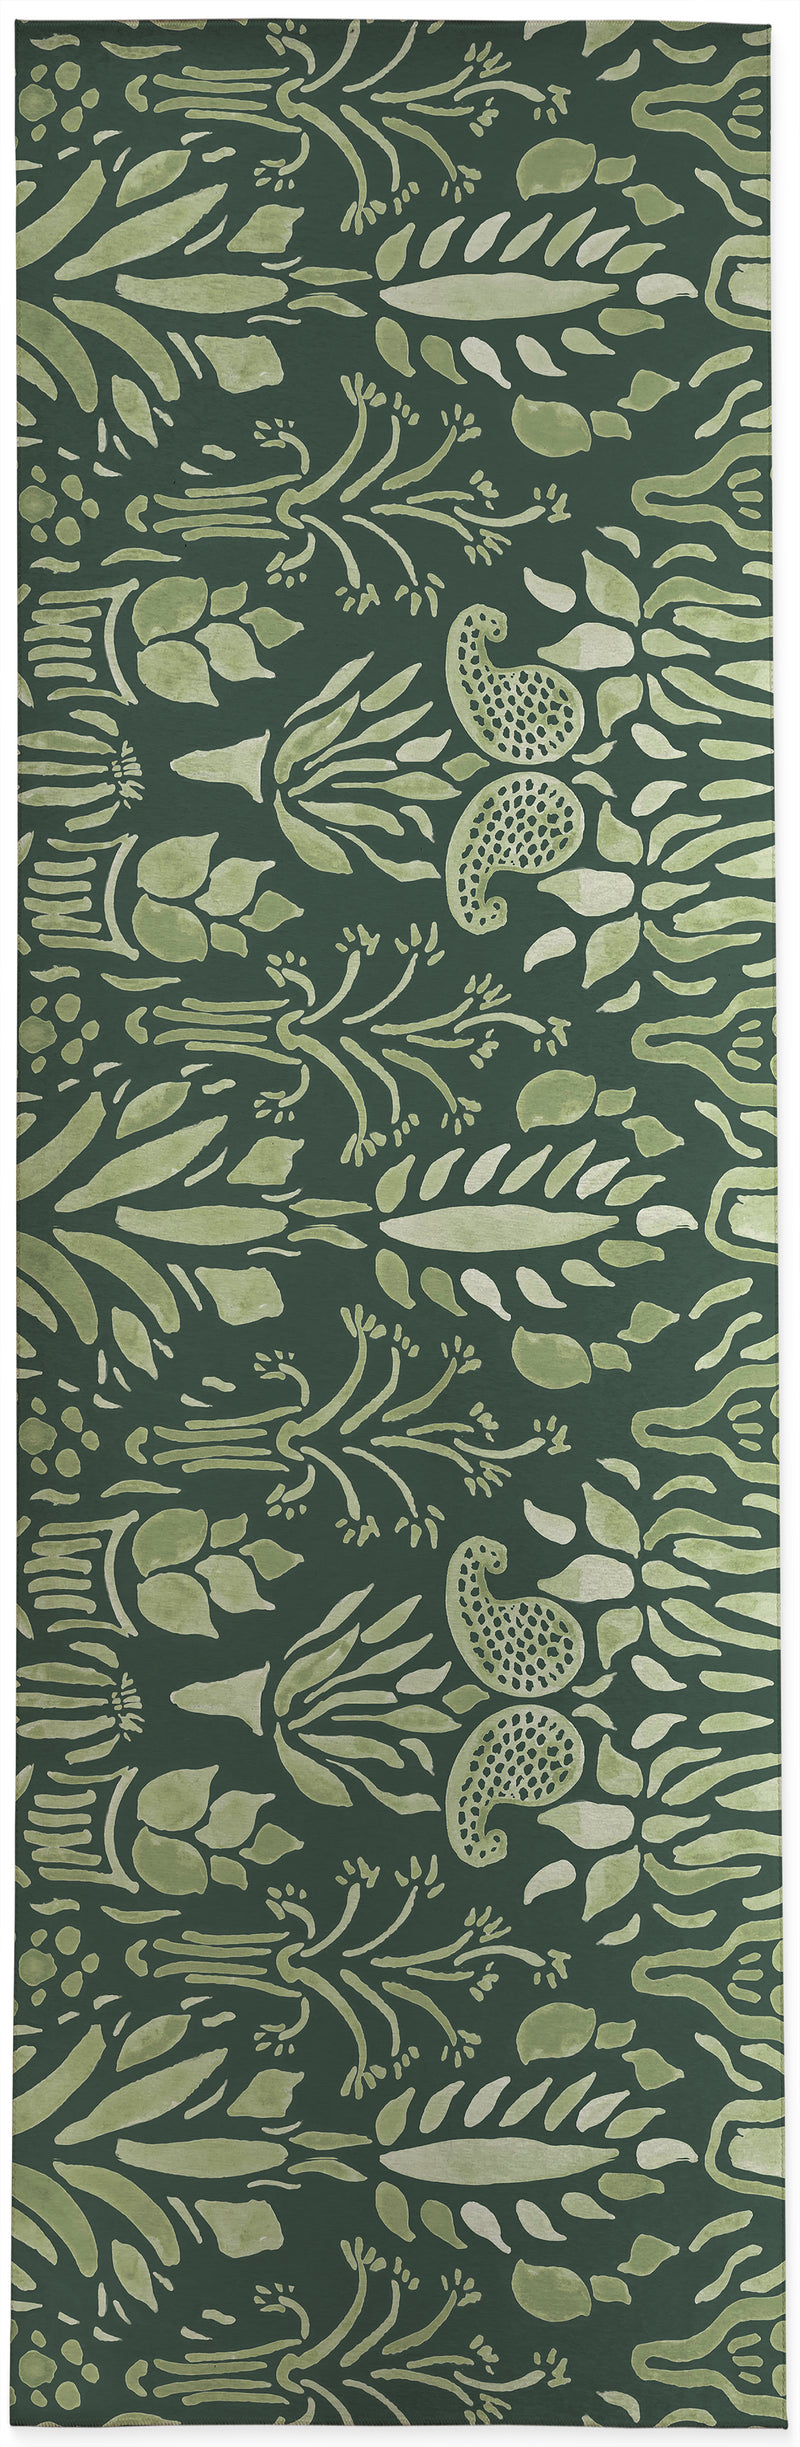 VASES AND PLANTS Area Rug By House of HaHa